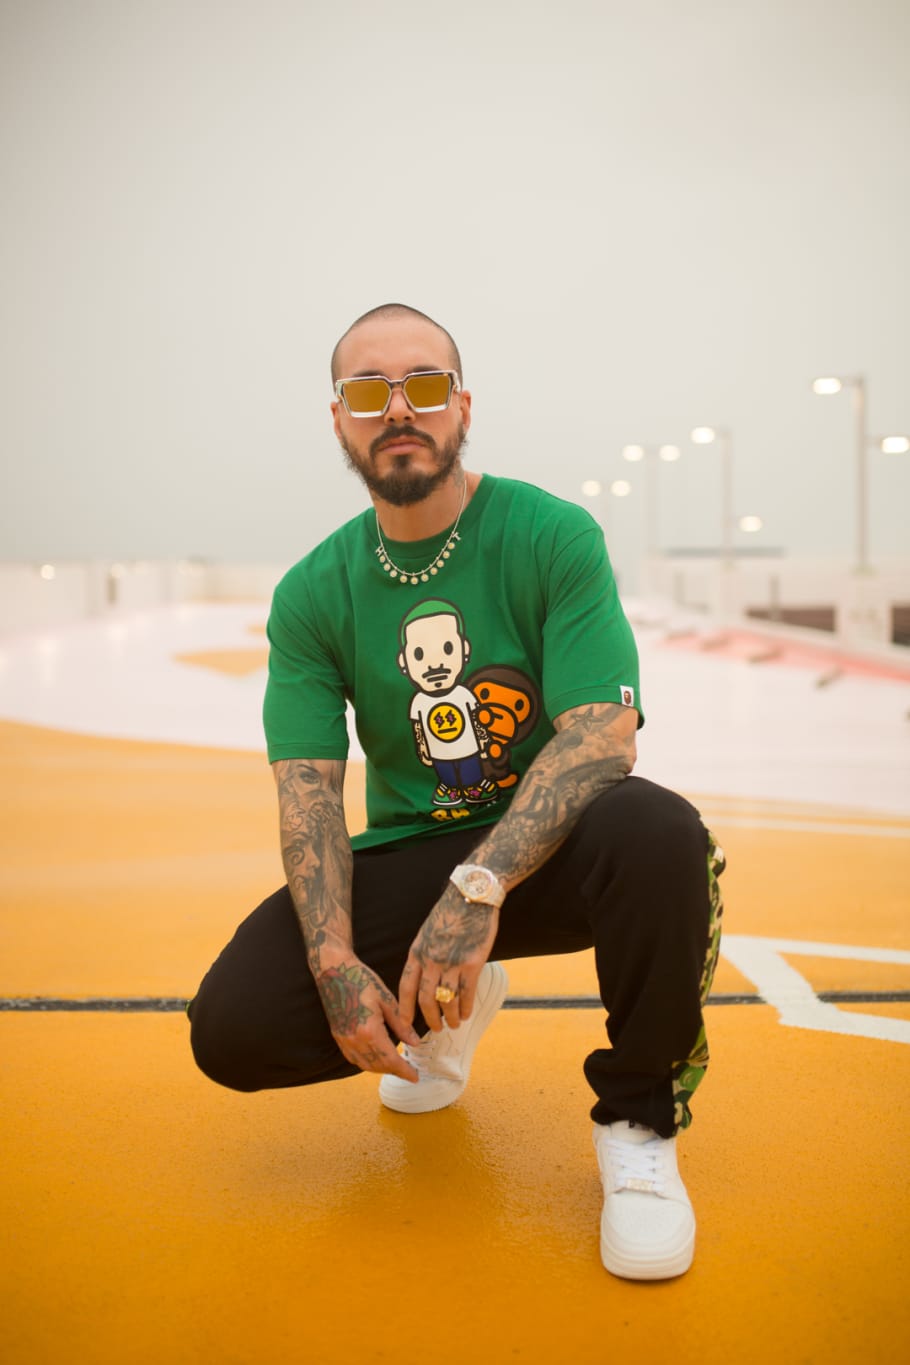 J Balvin and BAPE Unveil New Collab Collection | Complex